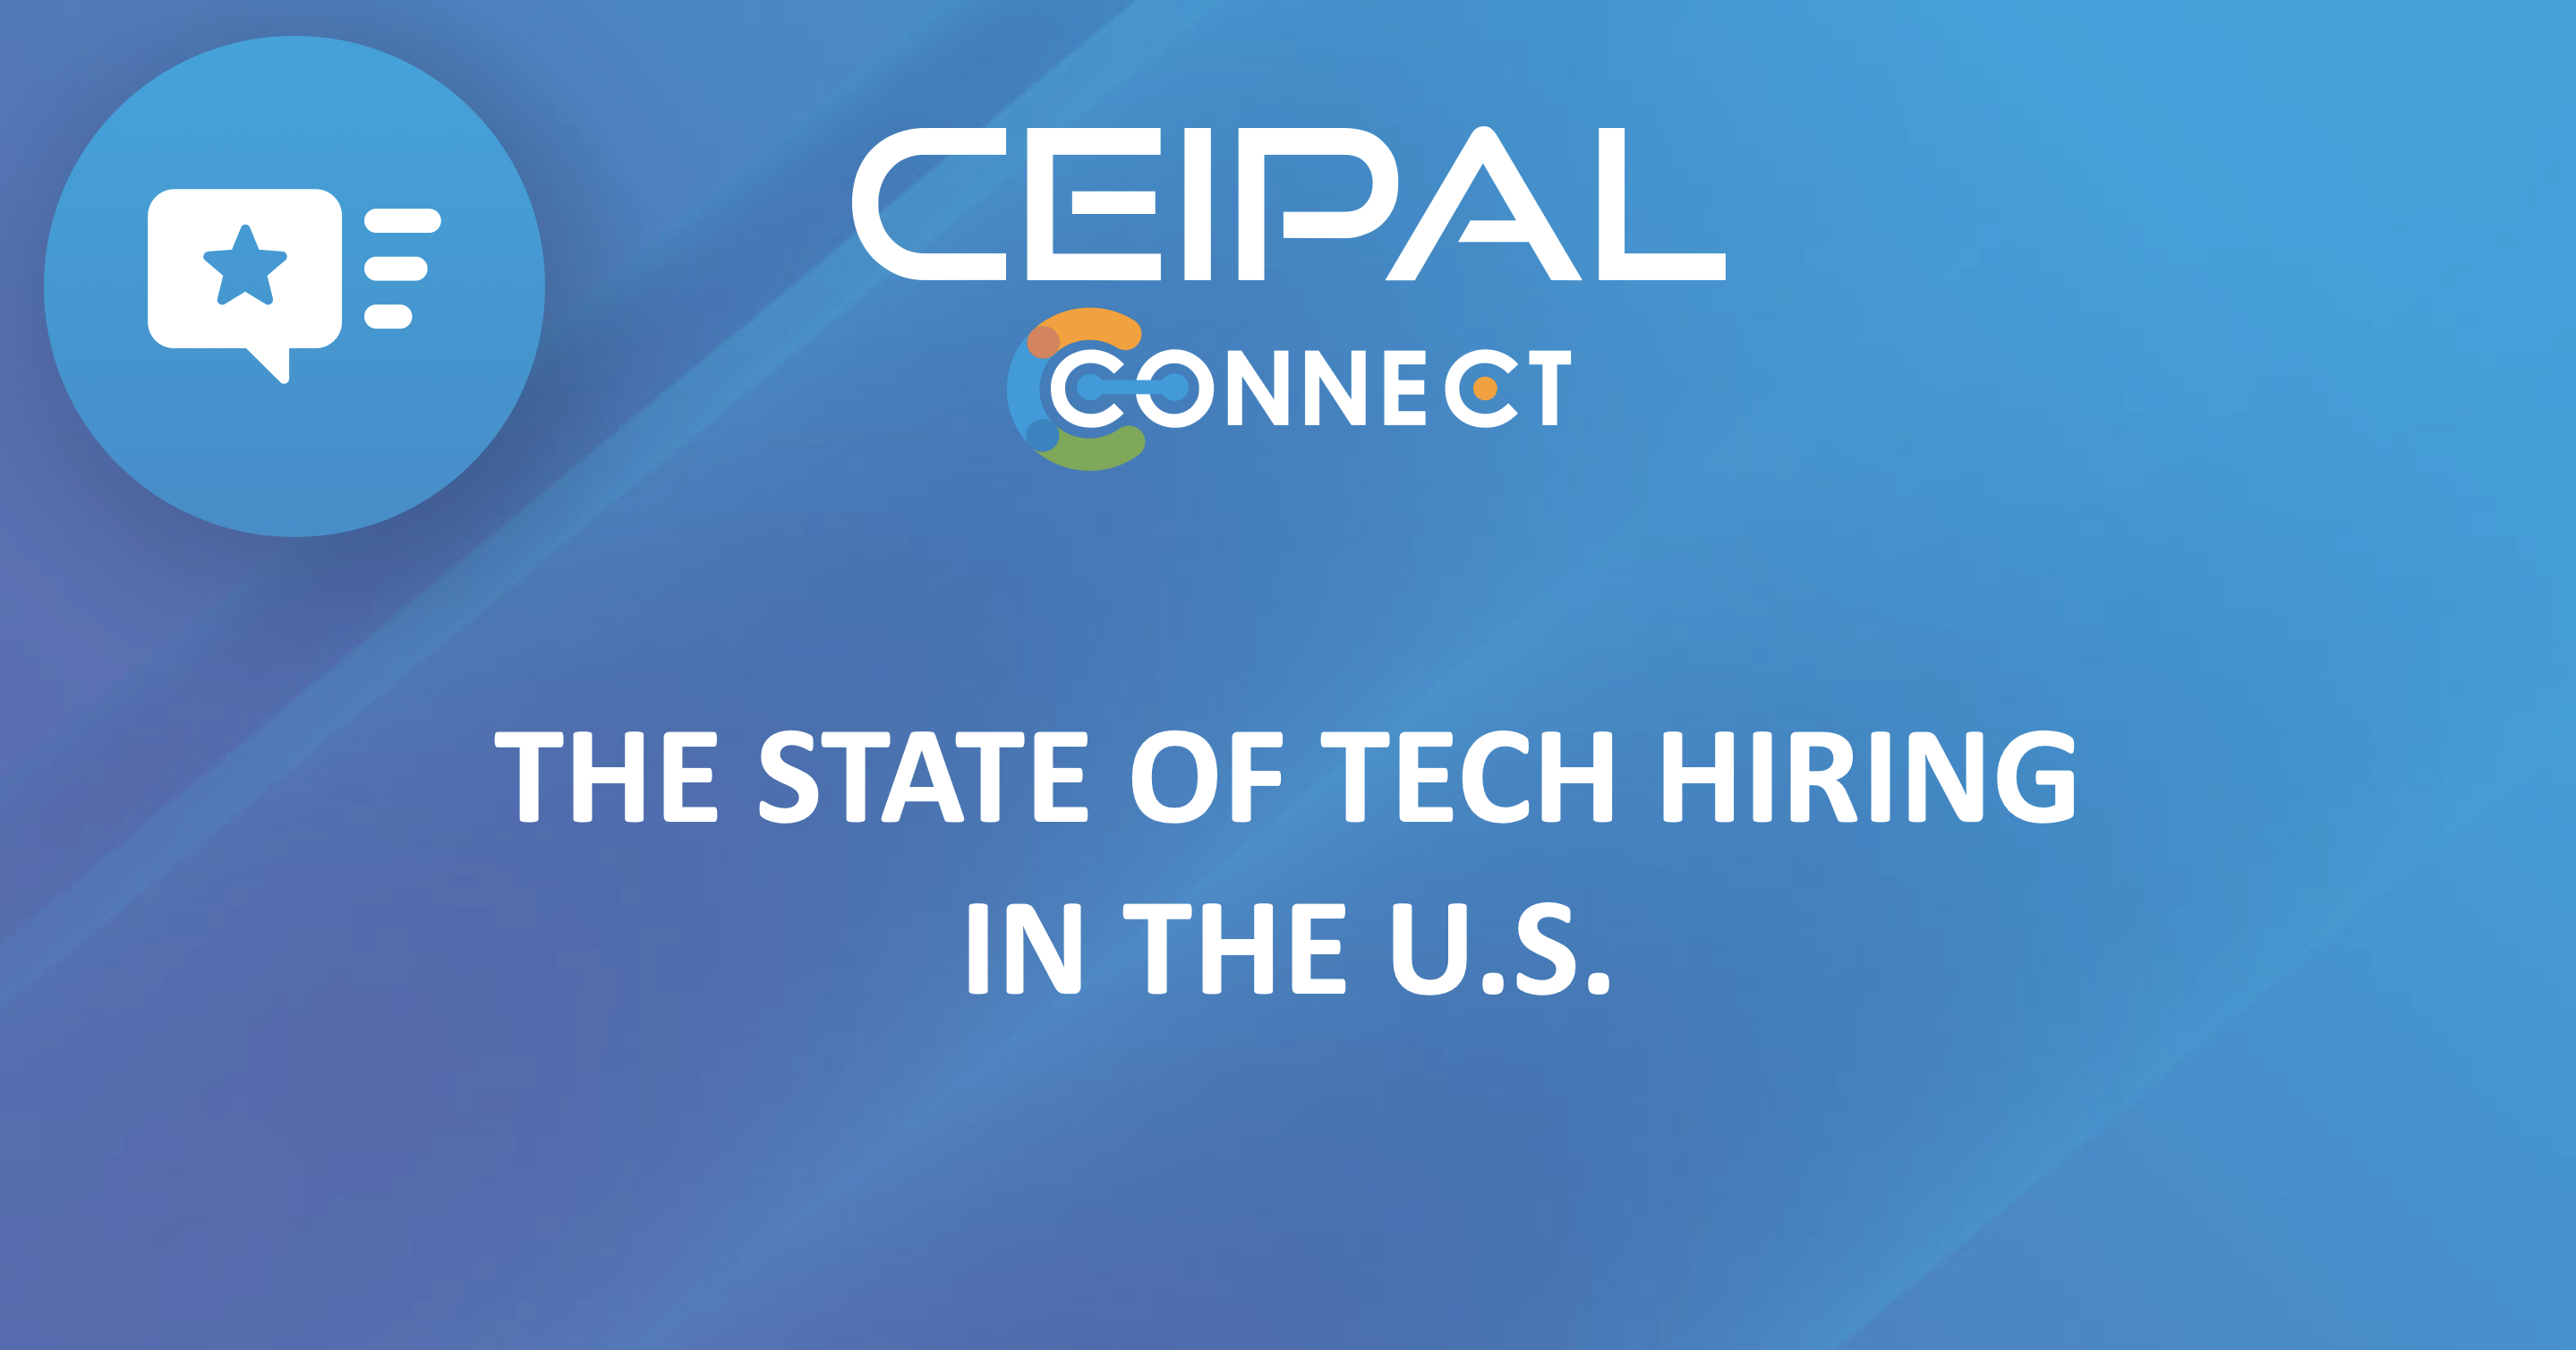 The State of Tech Hiring in the U.S.